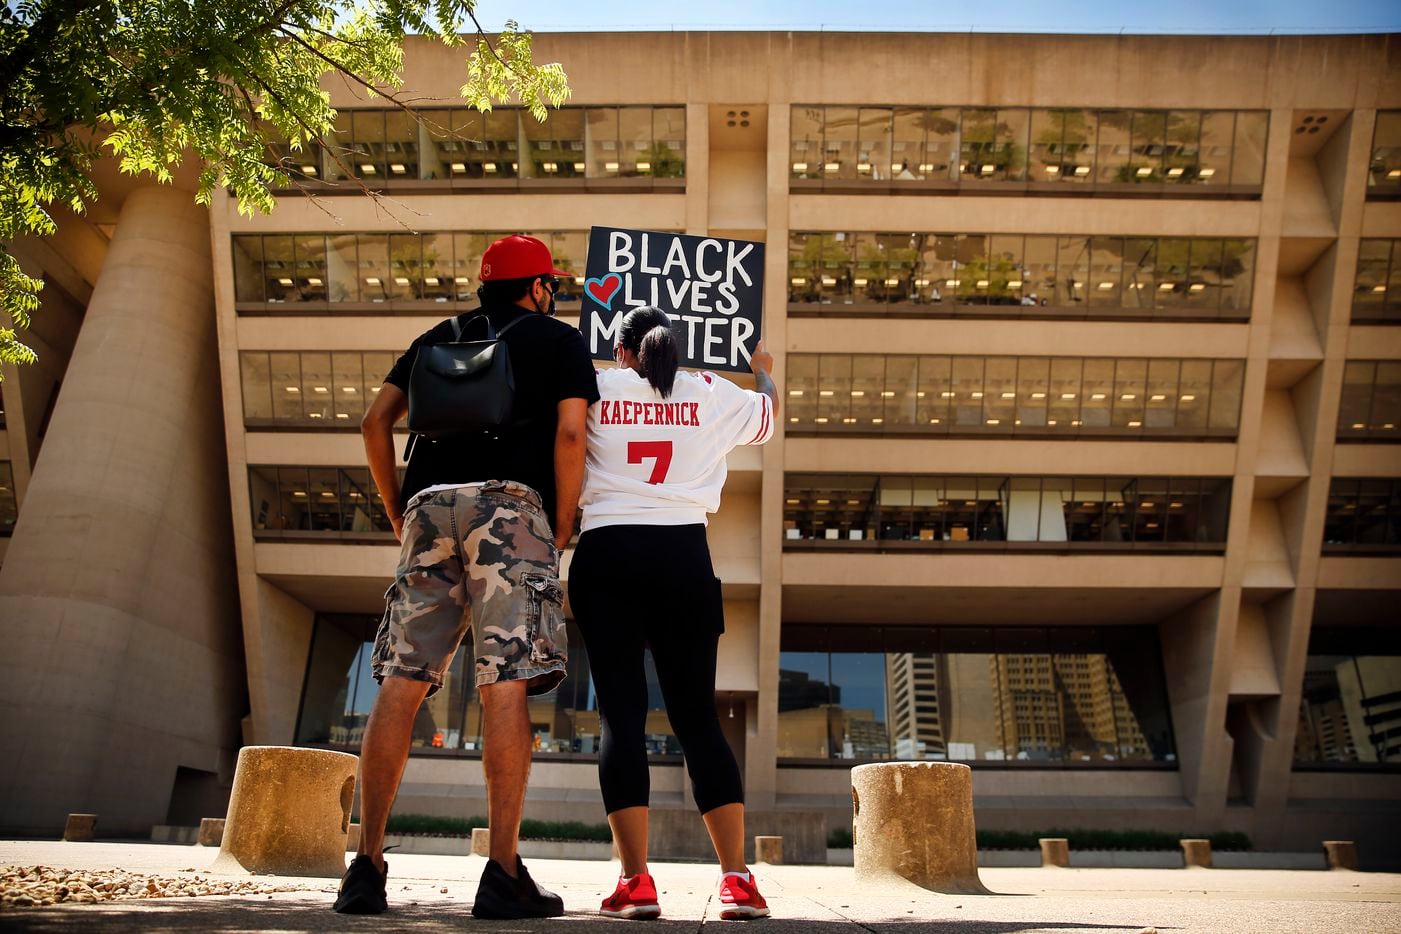 Protestors Xavier Reyes (left) and his girlfriend Aprille Peterson raise their Black Lives Matter painting toward Dallas City Hall during a Silent Protest and Mourning rally, Thursday, June 4, 2020. Aprille is wearing Xavier's Colin Kaepernick jersey, one he got before the kneeling protest and has worn ever since. No one spoke as they stood in solidarity with signs, protesting the in-custody death of George Floyd in Minneapolis.